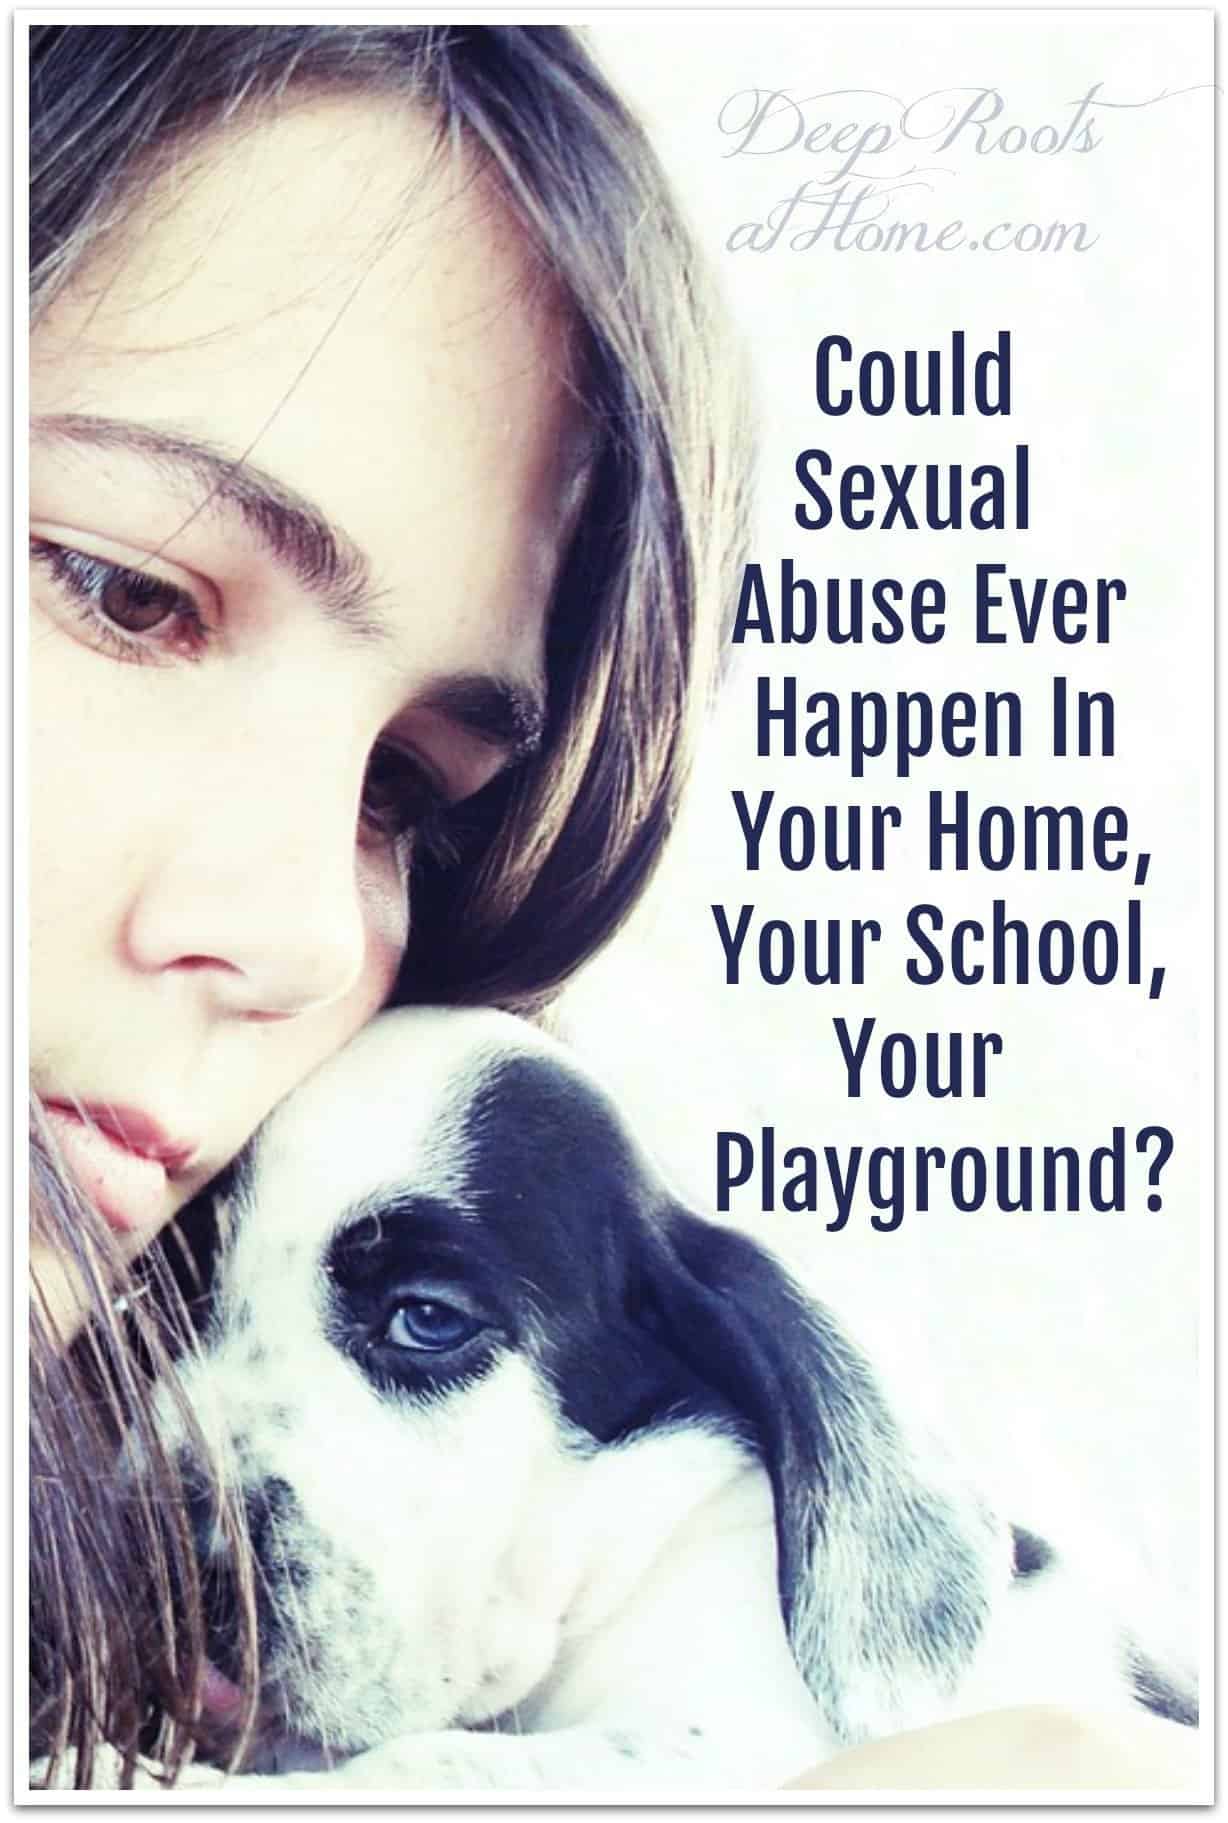 Could Sexual Abuse Ever Happen In Your Home, School, Playground? A sober looking, sad girl with her sad-eyed puppy